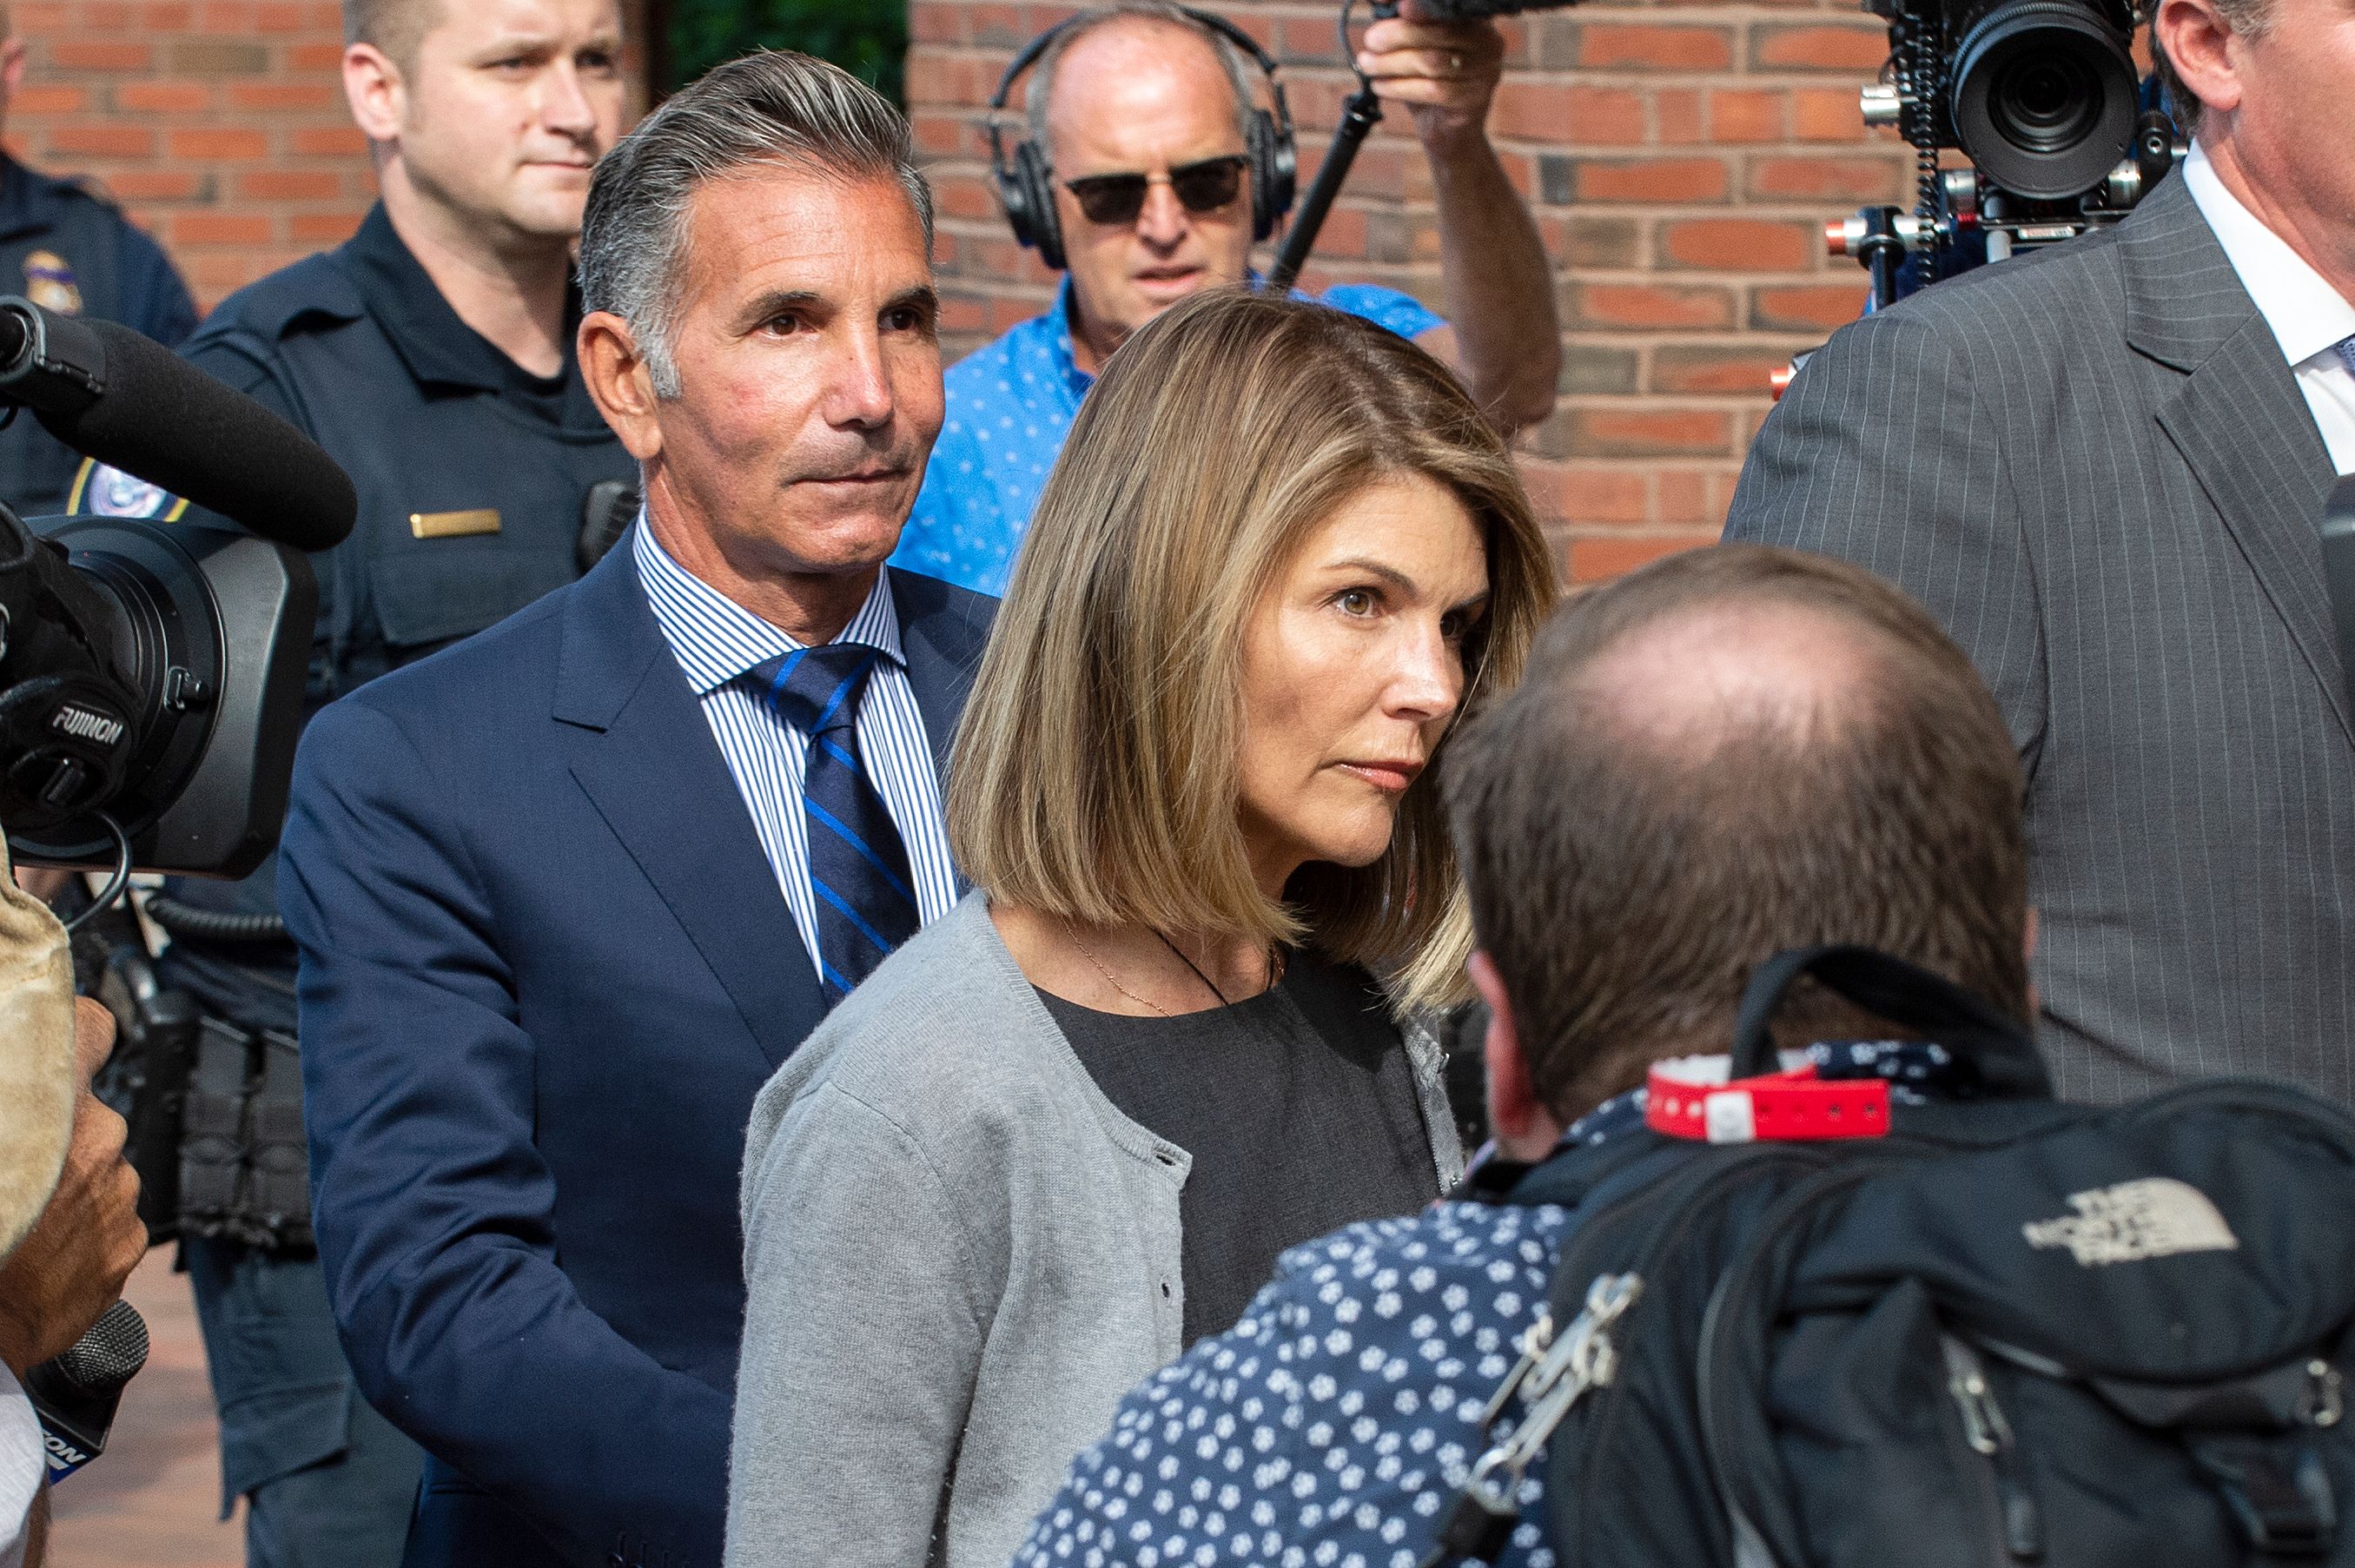 Actress Lori Loughlin and husband Mossimo Giannulli exit the Boston Federal Court house after a pre-trial hearing with Magistrate Judge Kelley at the John Joseph Moakley US Courthouse in Boston on August 27, 2019. - Loughlin and Giannulli are charged with conspiracy to commit mail and wire fraud and conspiracy to commit money laundering in the college admissions scandal. (Photo credit JOSEPH PREZIOSO/AFP via Getty Images)